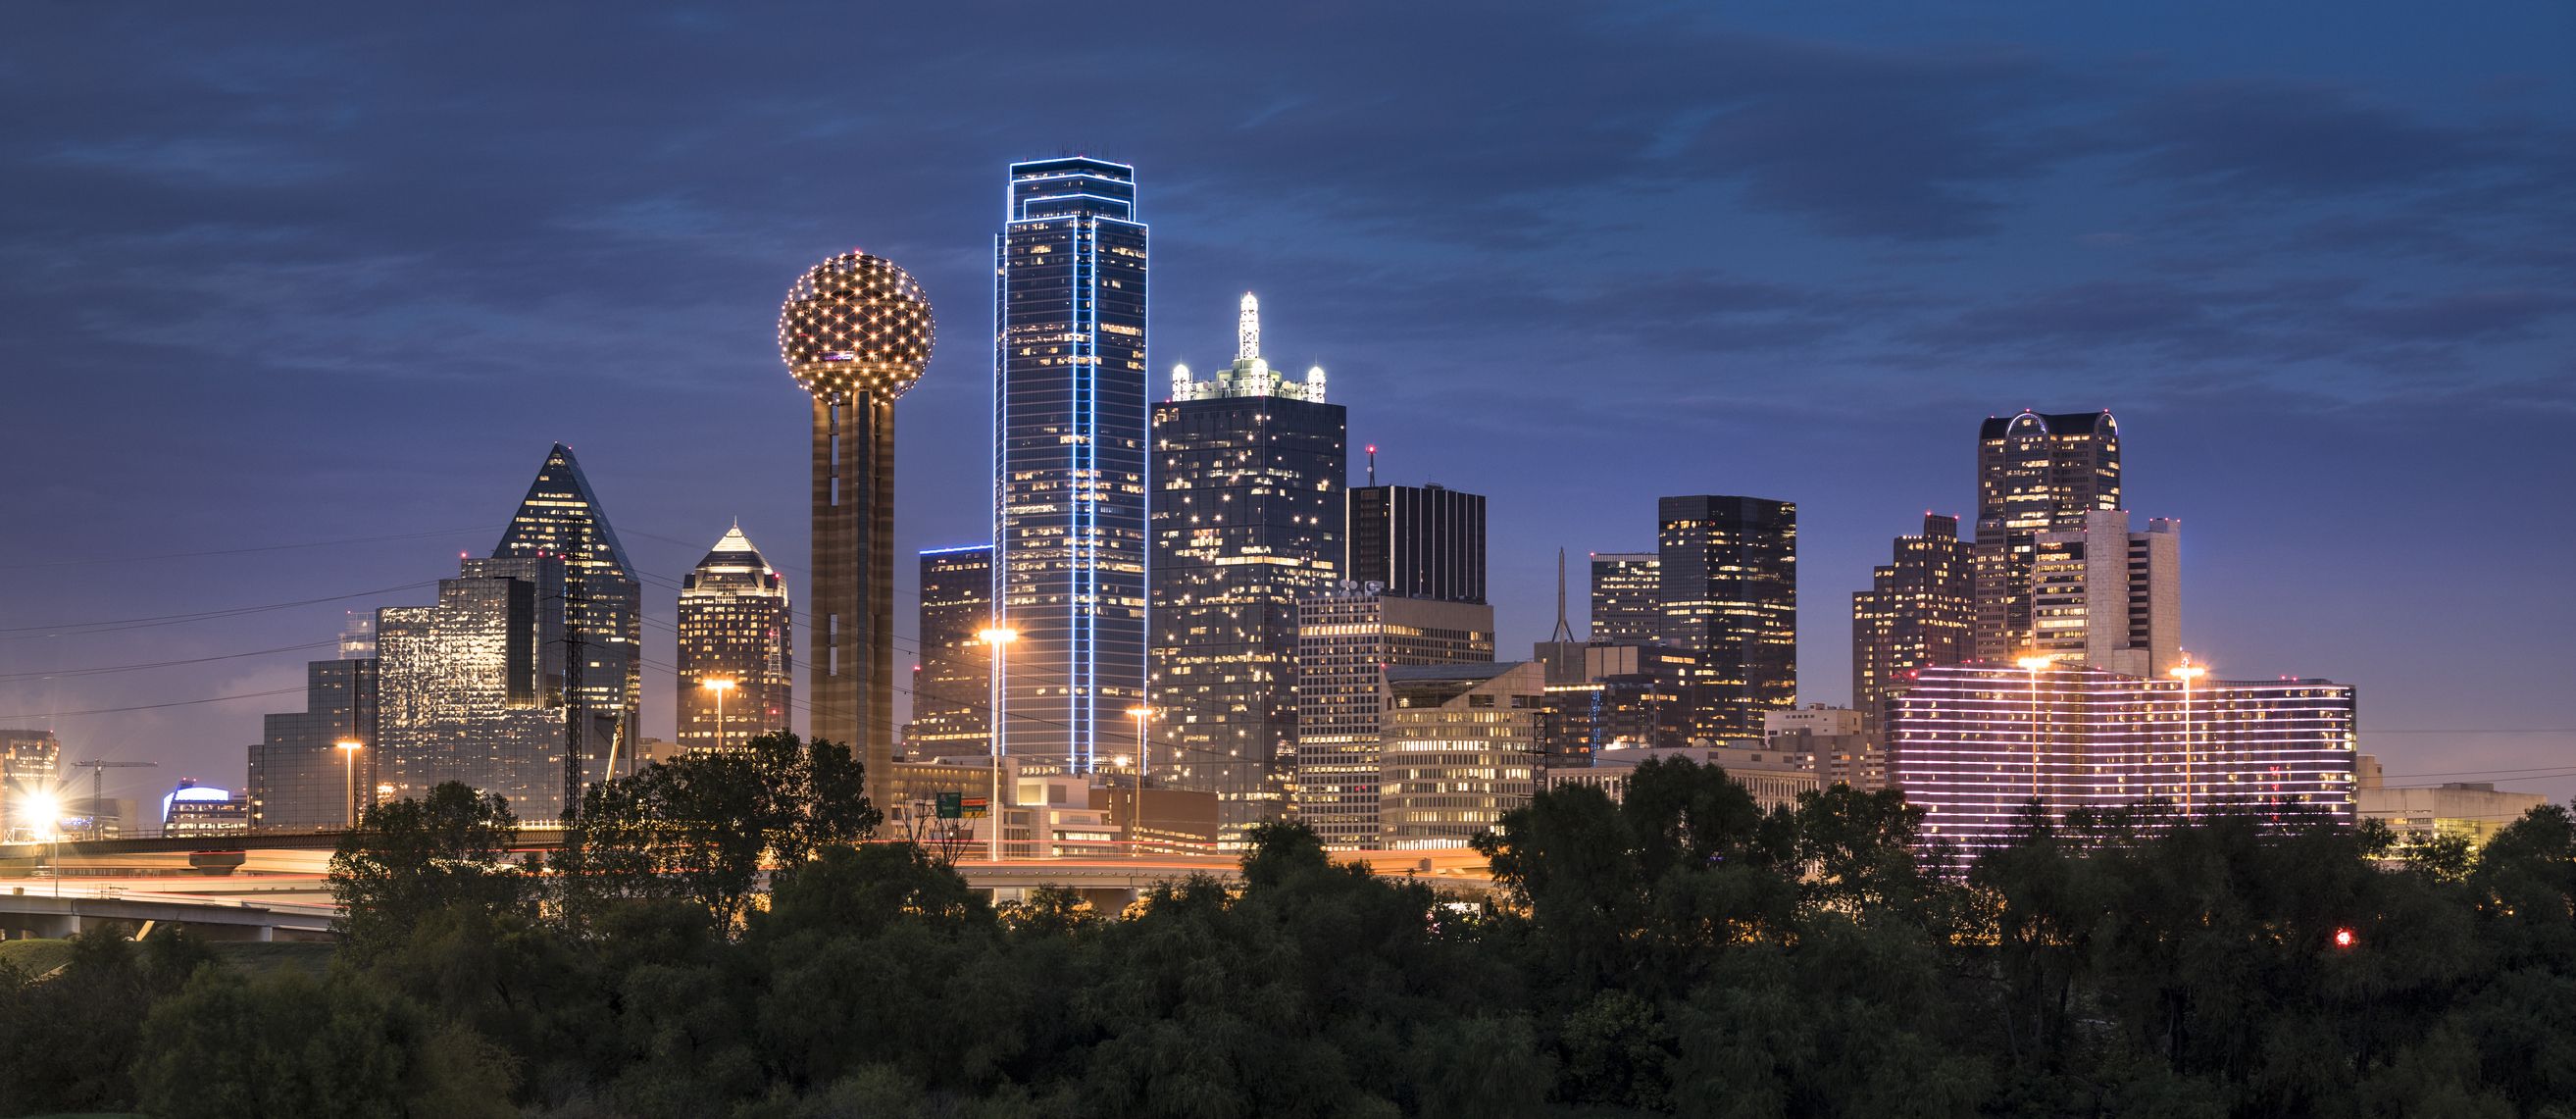 https://hips.hearstapps.com/hmg-prod/images/dallas-texas-skyline-and-reunion-tower-panoramic-royalty-free-image-1621971092.jpg